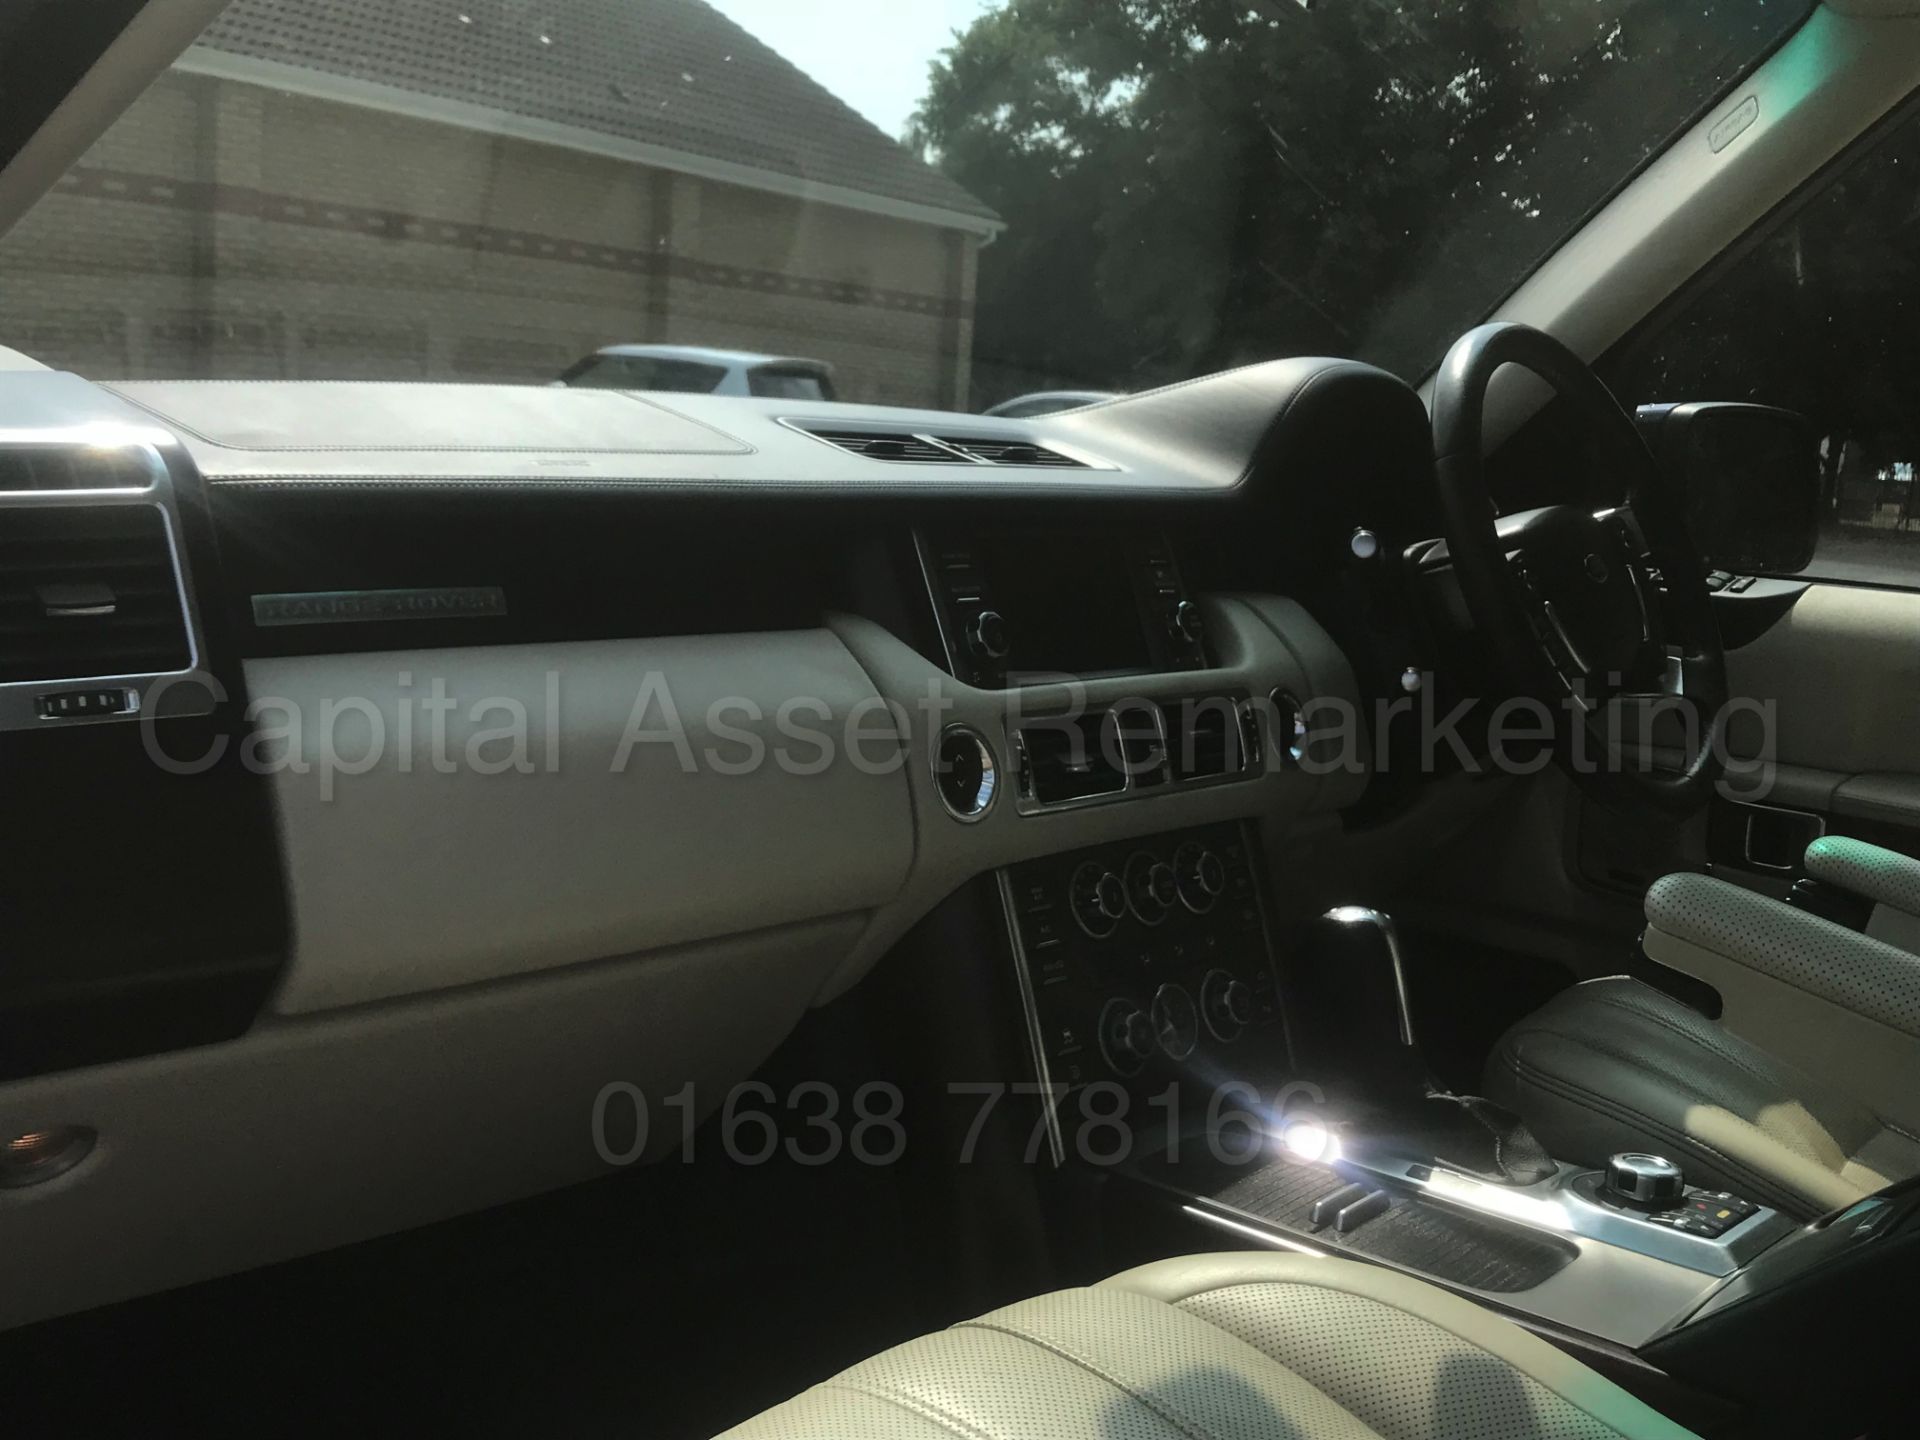 (On Sale) RANGE ROVER VOGUE **SE EDITION** (2010 - FACELIFT EDITION) 'TDV8 - 268 BHP - AUTO' **WOW** - Image 27 of 62